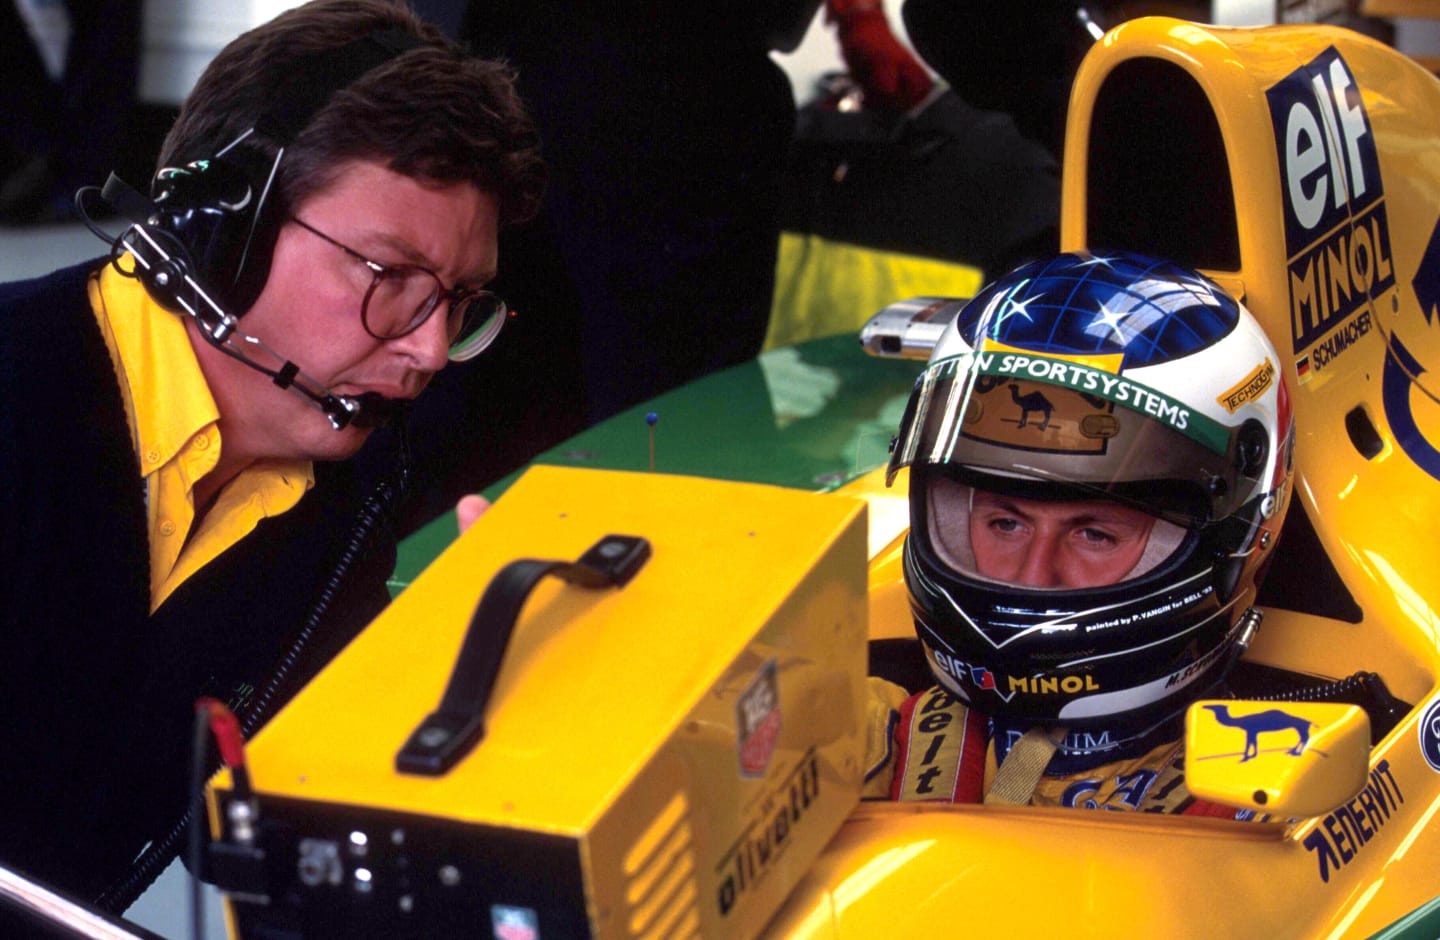 Michael Schumacher (GER) watches the qualifying times with Ross Brawn (GBR)
Belgian Grand Prix,